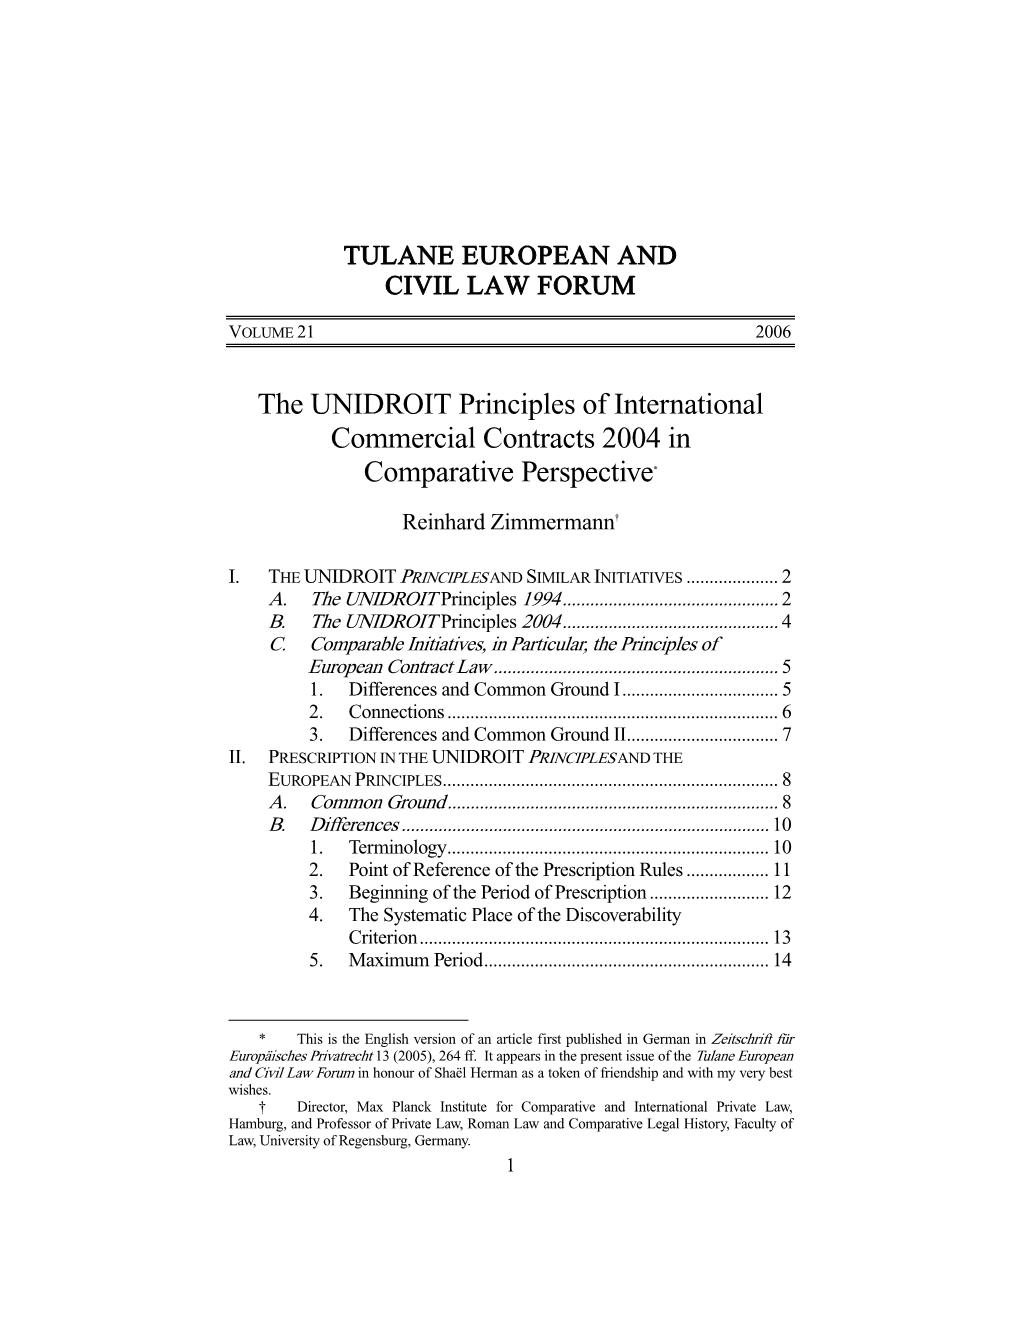 The UNIDROIT Principles of International Commercial Contracts 2004 in Comparative Perspective*